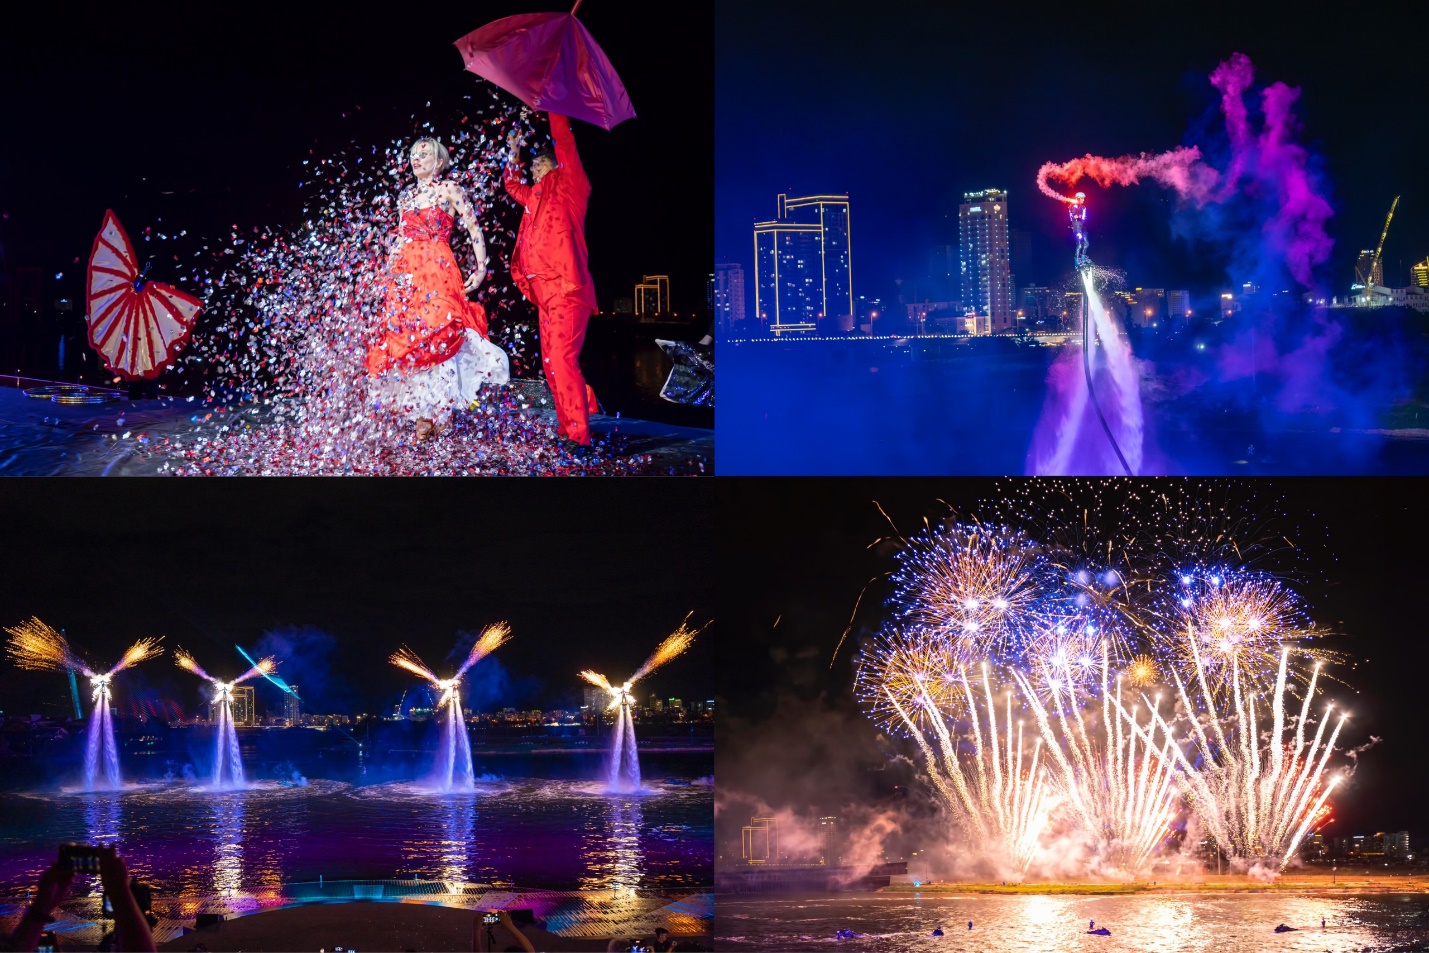 'Symphony of River' show at Da Nang Downtown with artistic fireworks every night.